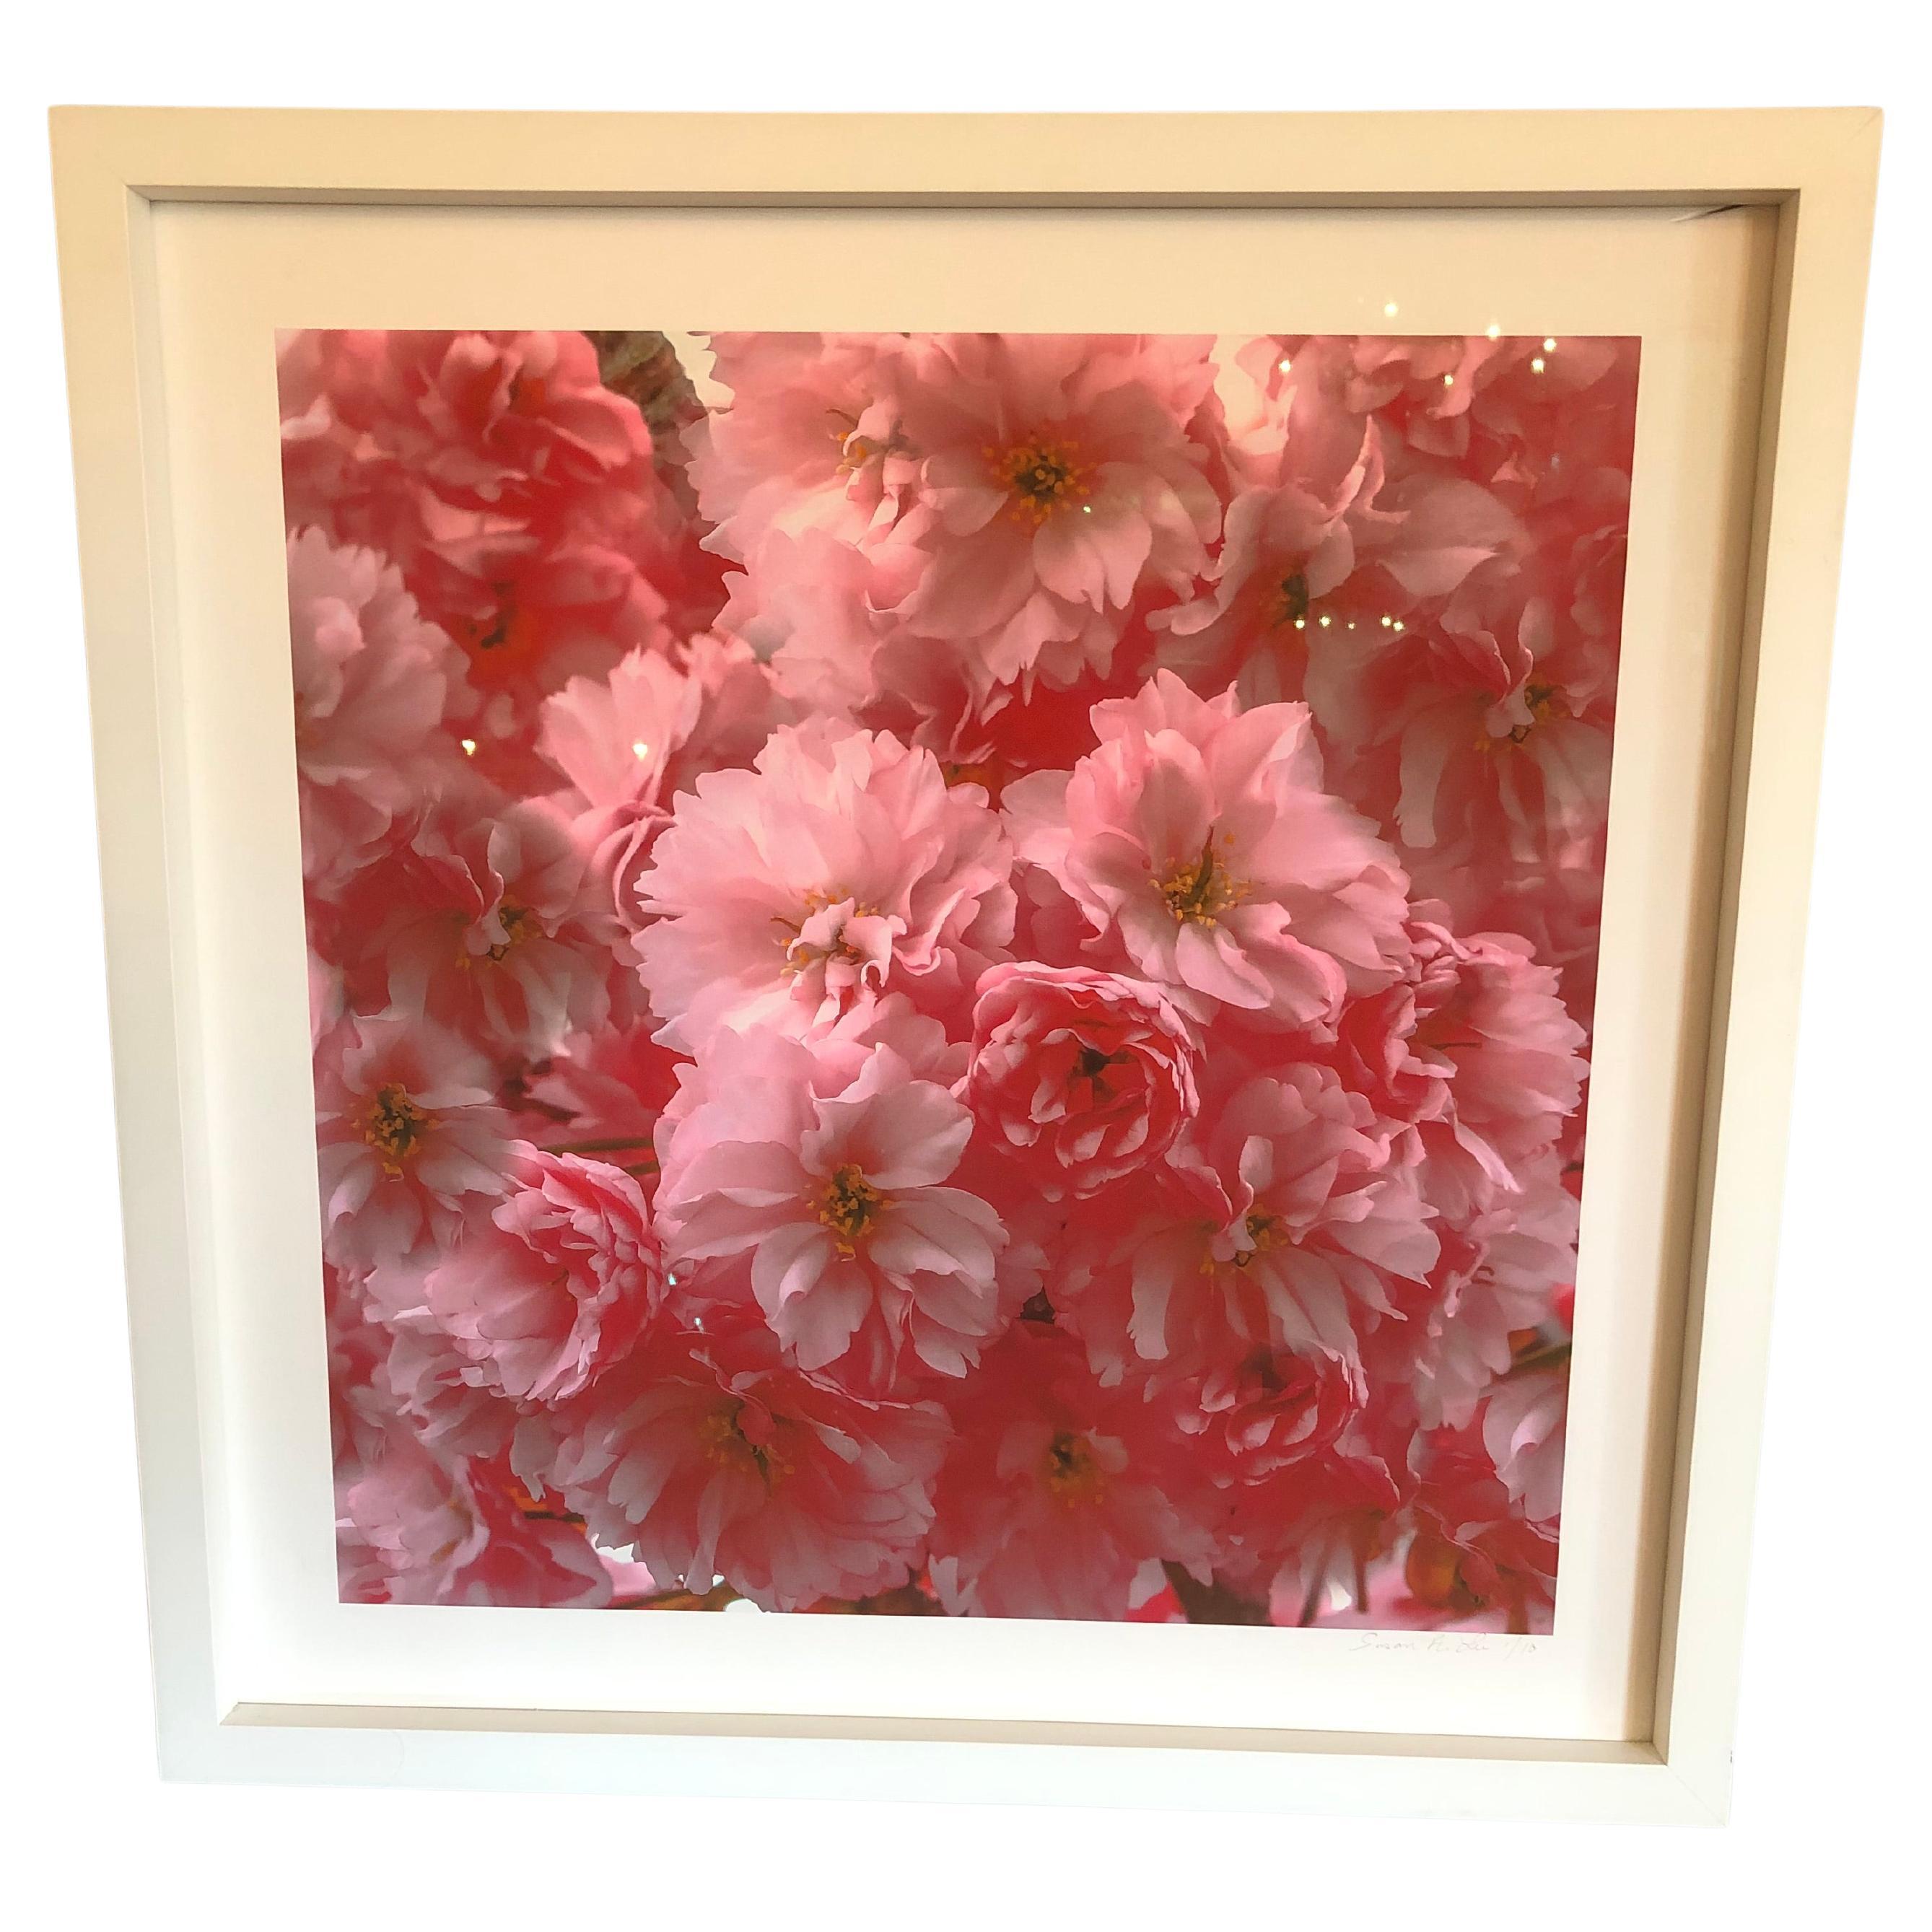 Fragrant Limited Edition High Rez Art Photograph of Cherry Blossoms